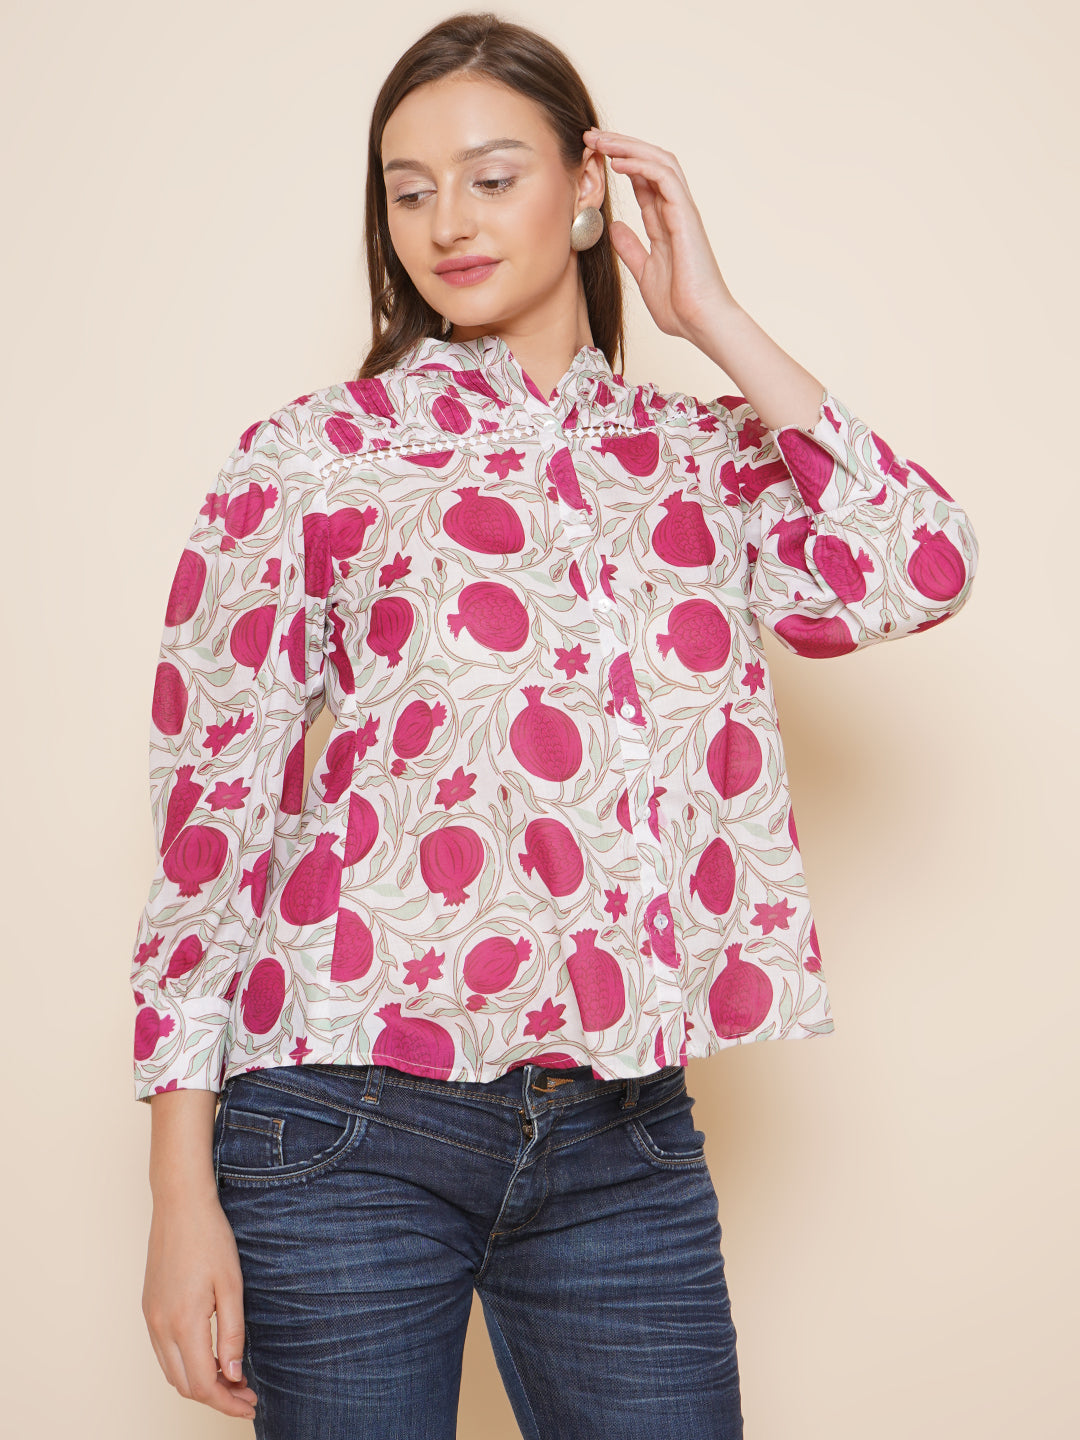 Bhama Couture Off White & Pink Printed Shirt Style Top